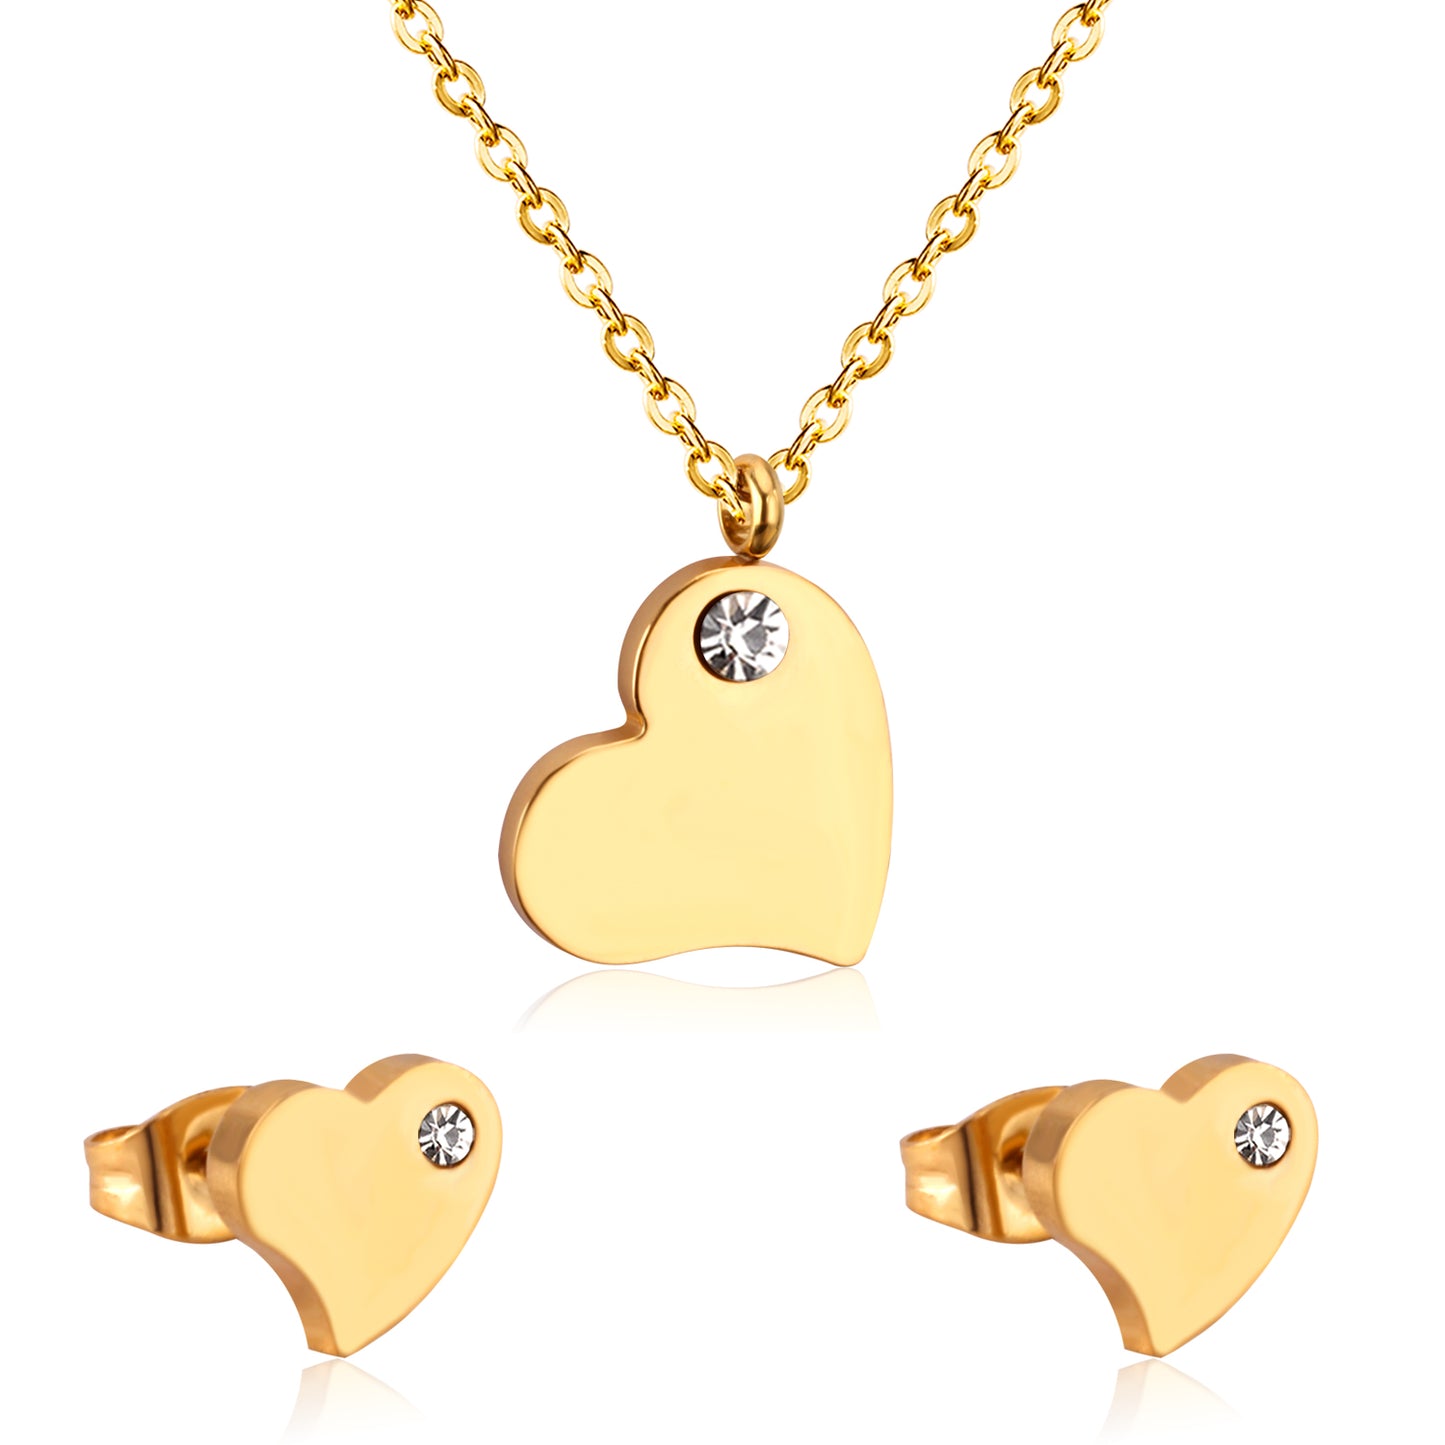 Children's, Teens' and Mothers' Necklace/Earrings Sets:  Surgical Steel, Gold IP, Hearts